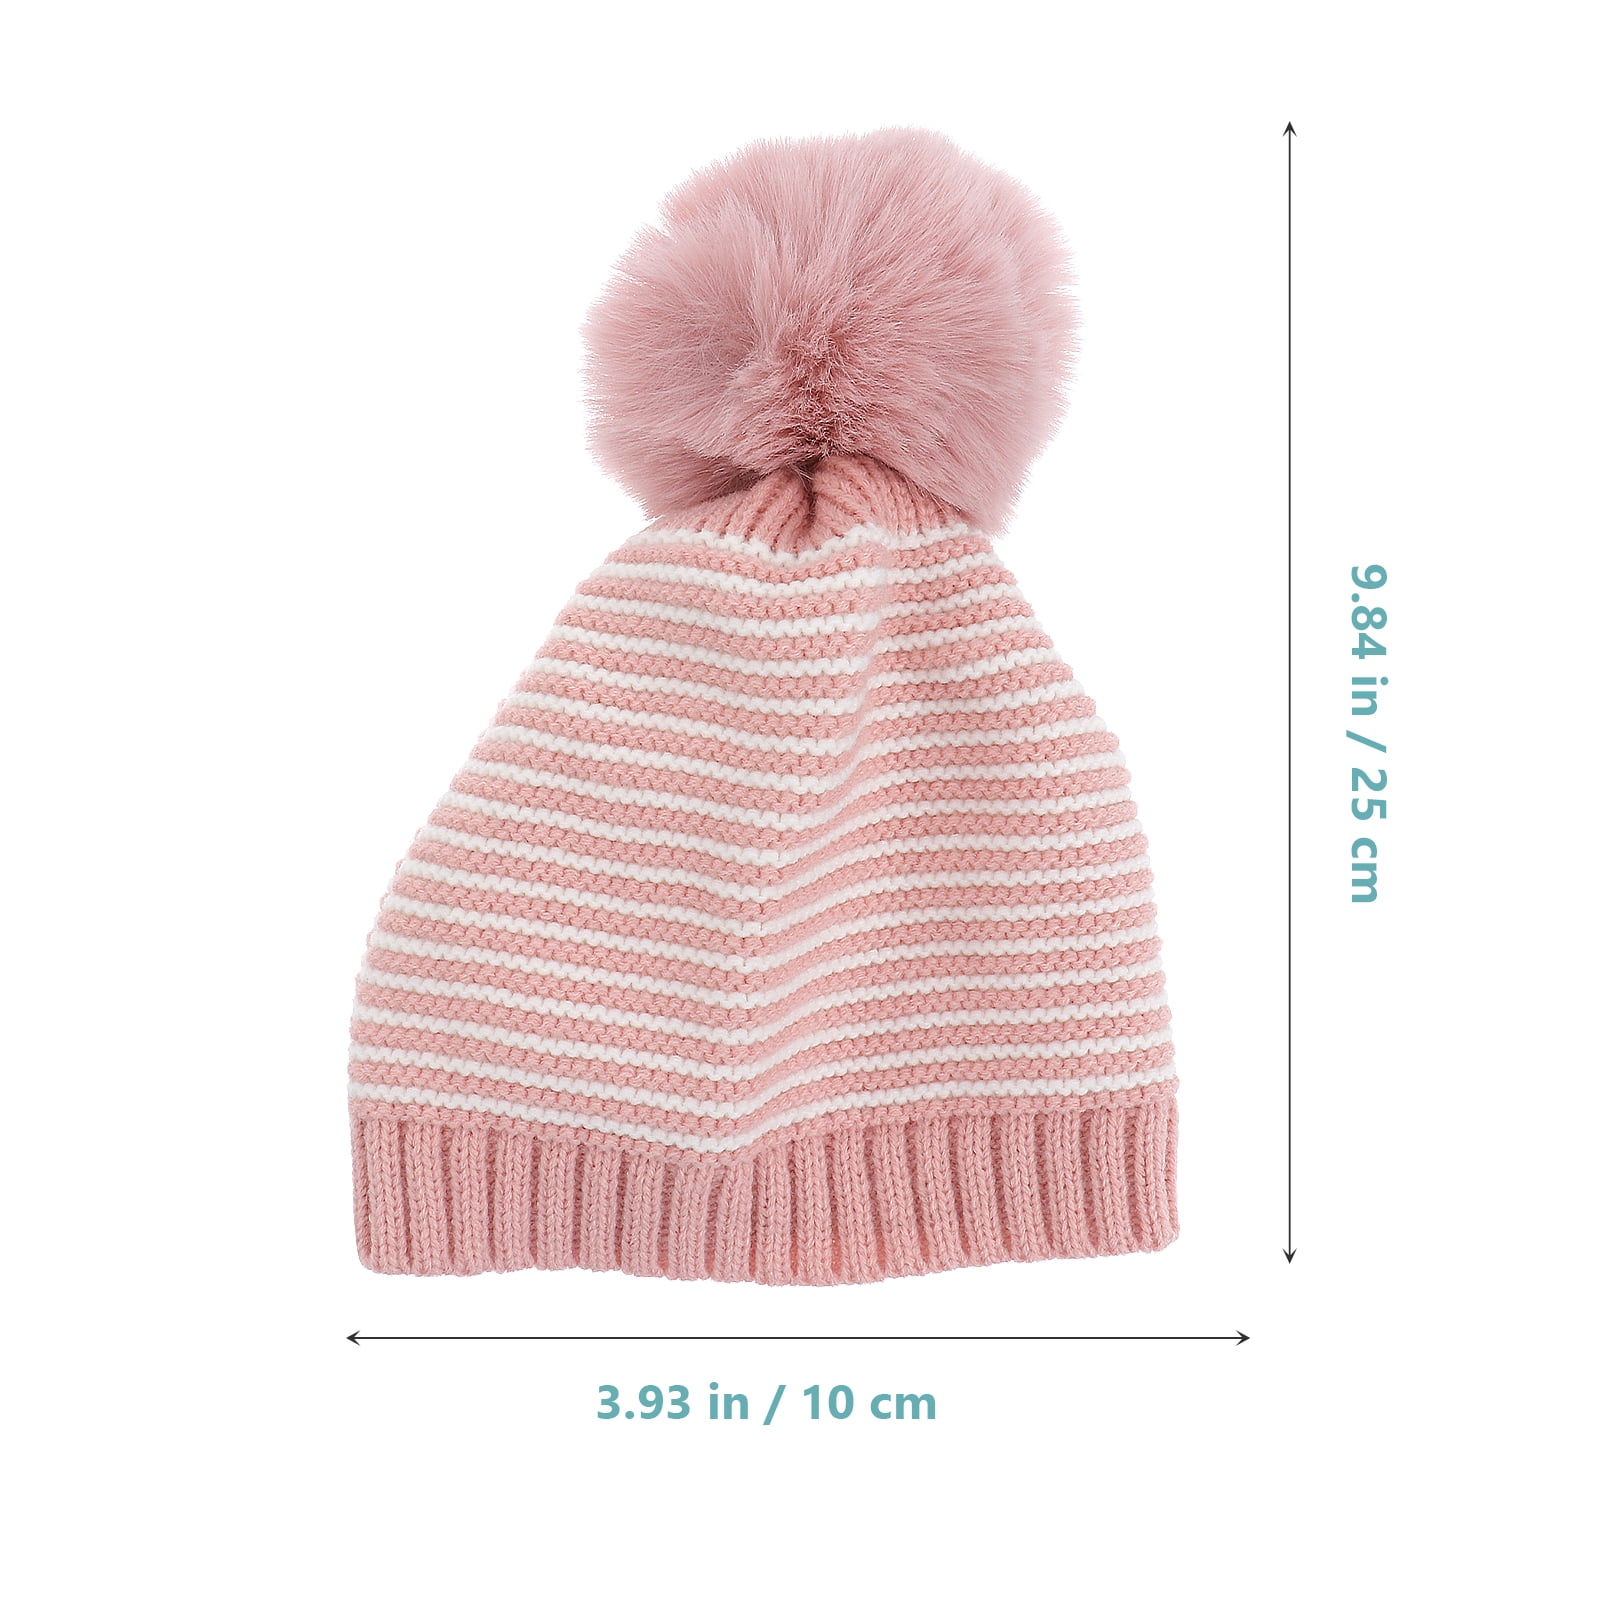 Classic Warm Adorable Kids Striped Hat Knit Pom Beanie White) Hats & Christmas (Pink Pom for S Winter 